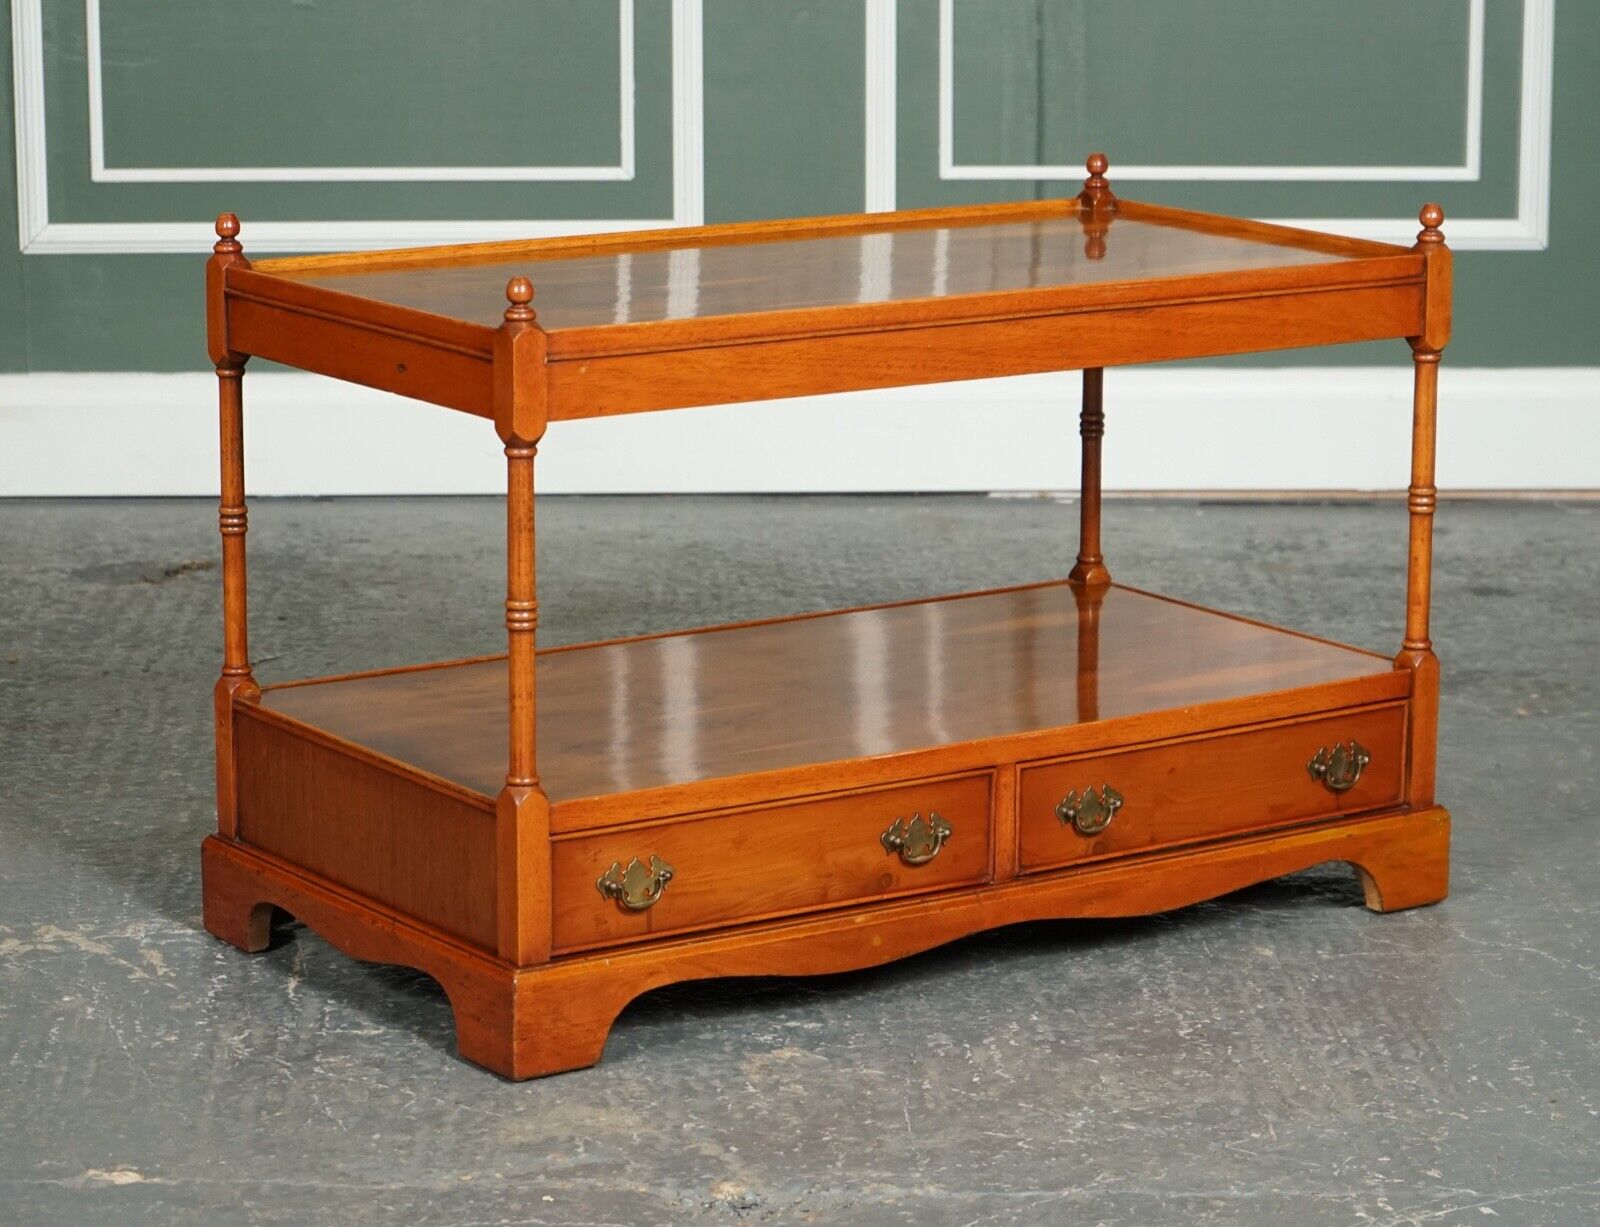 VINTAGE YEW WOOD GEORGIAN STYLE COFFEE TABLE TV STAND WITH TWO DRAWERS